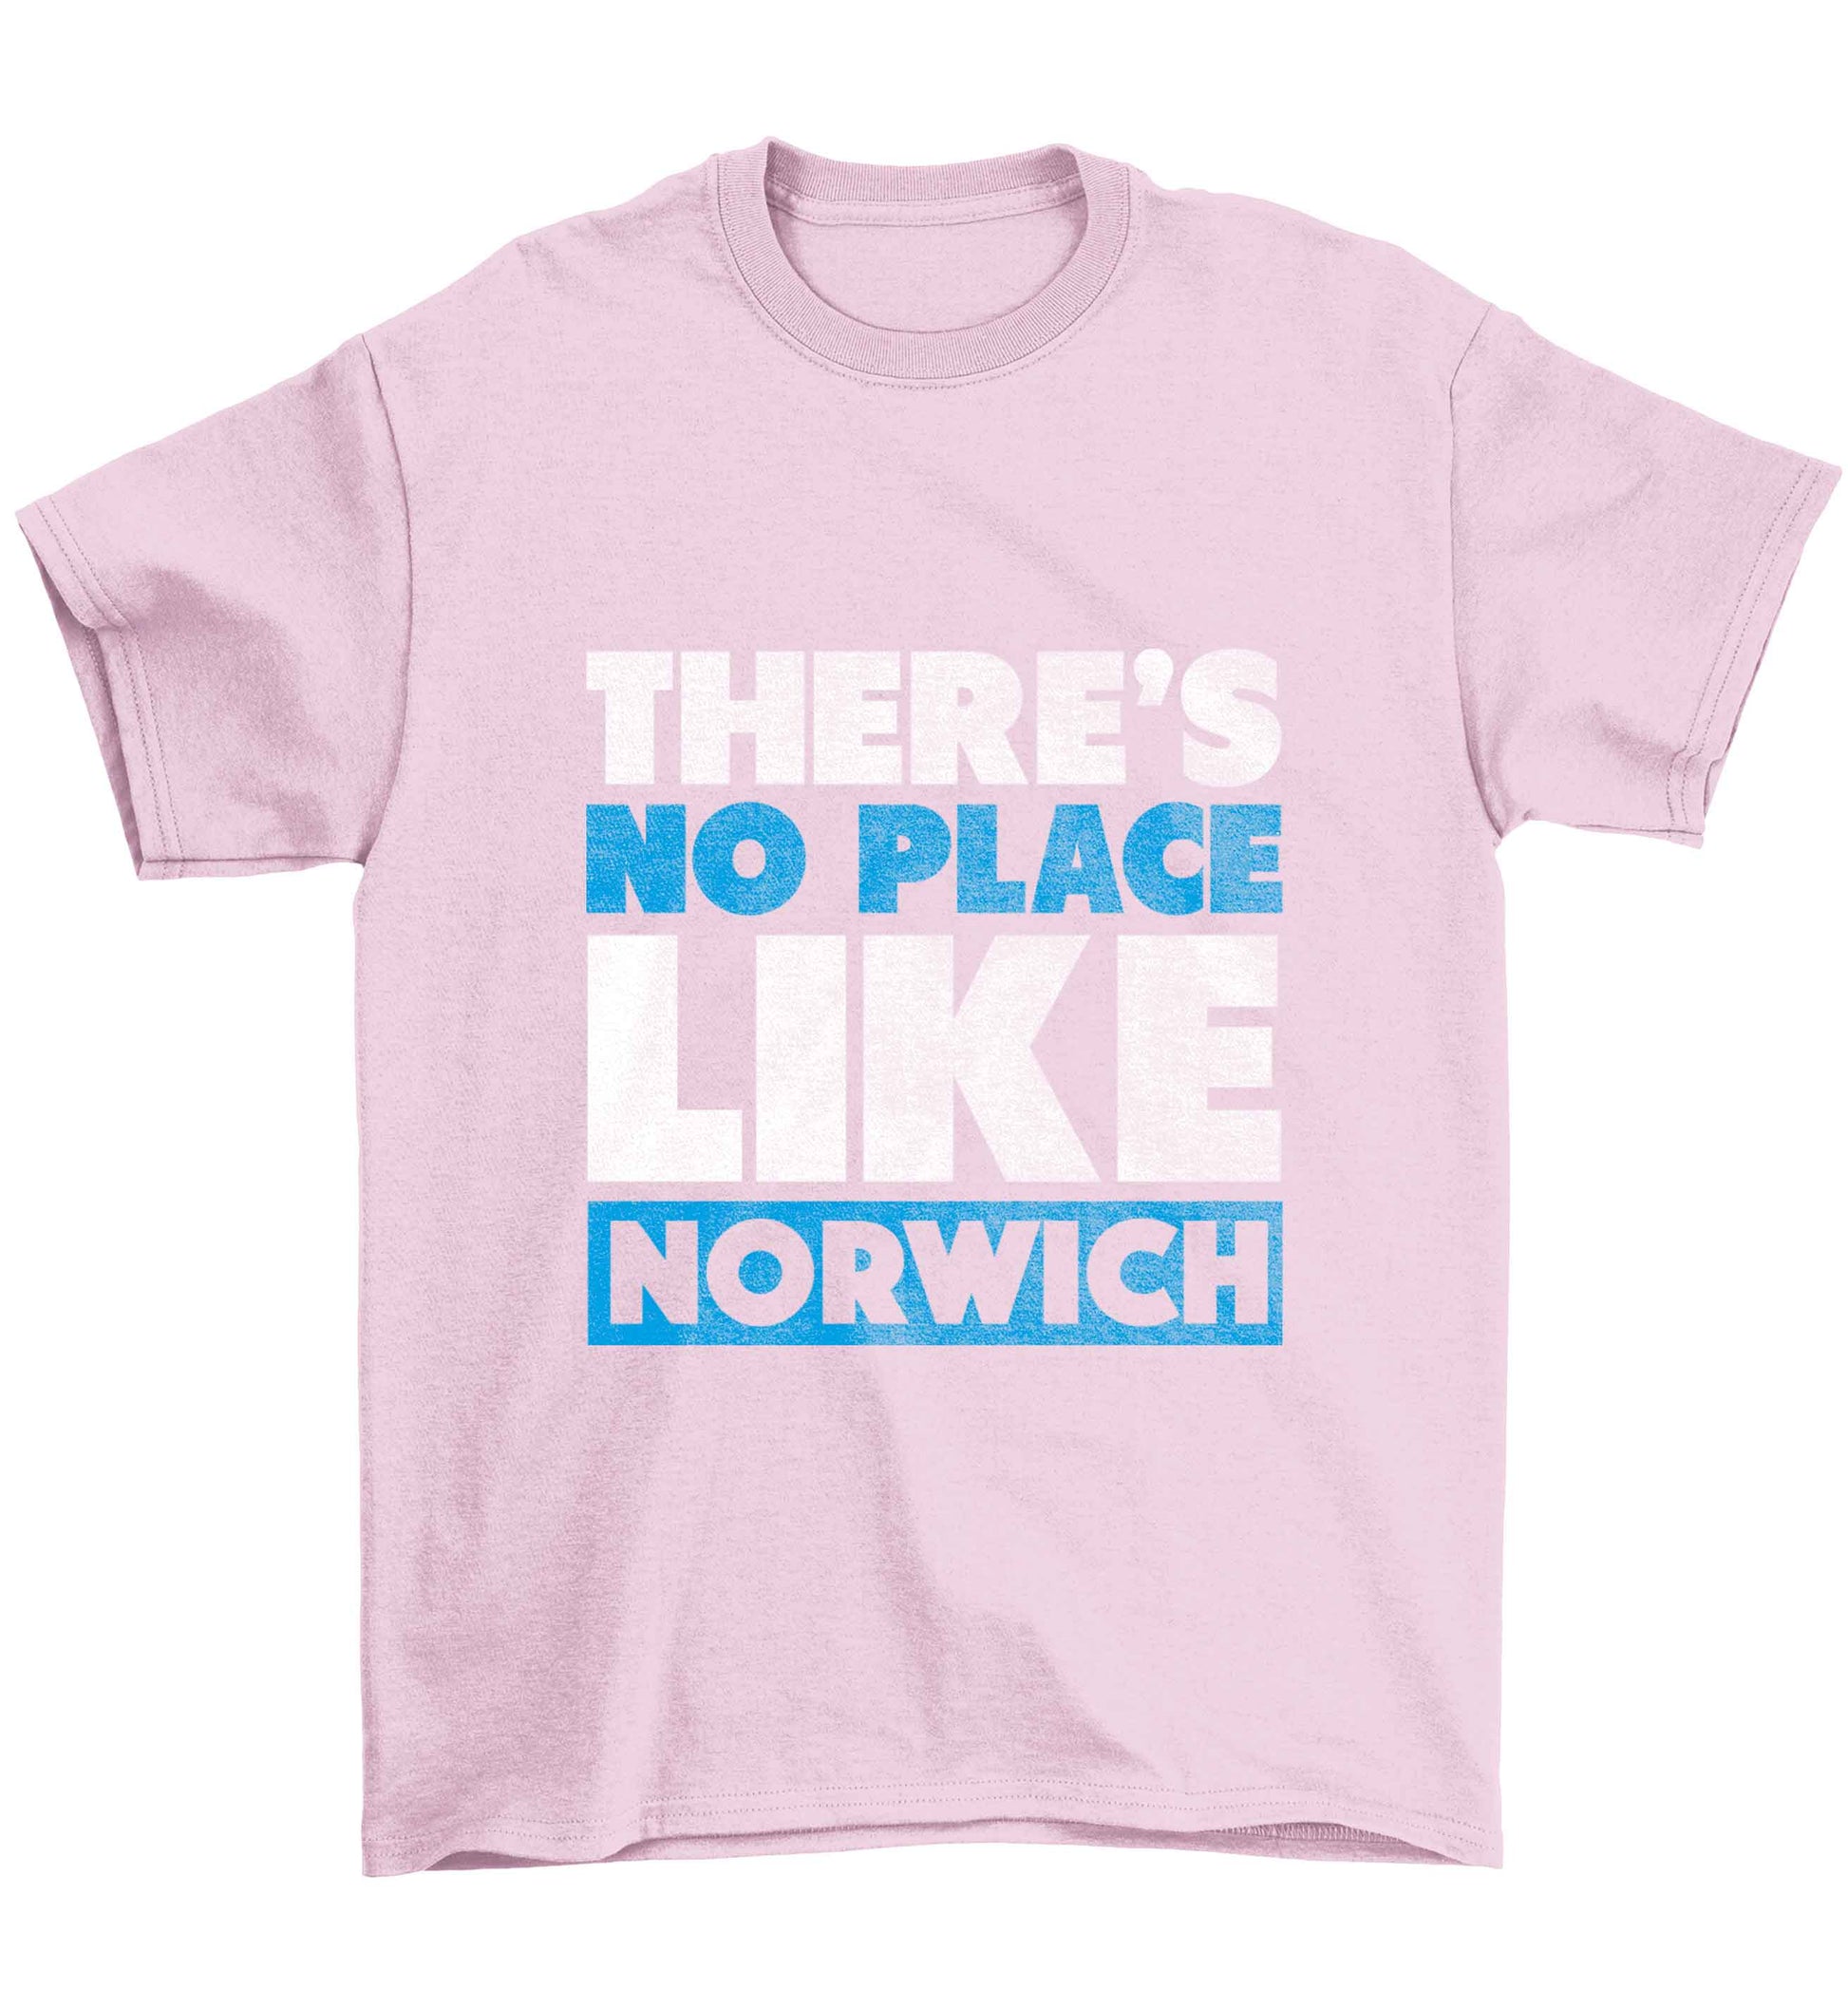 There's no place like Norwich Children's light pink Tshirt 12-13 Years